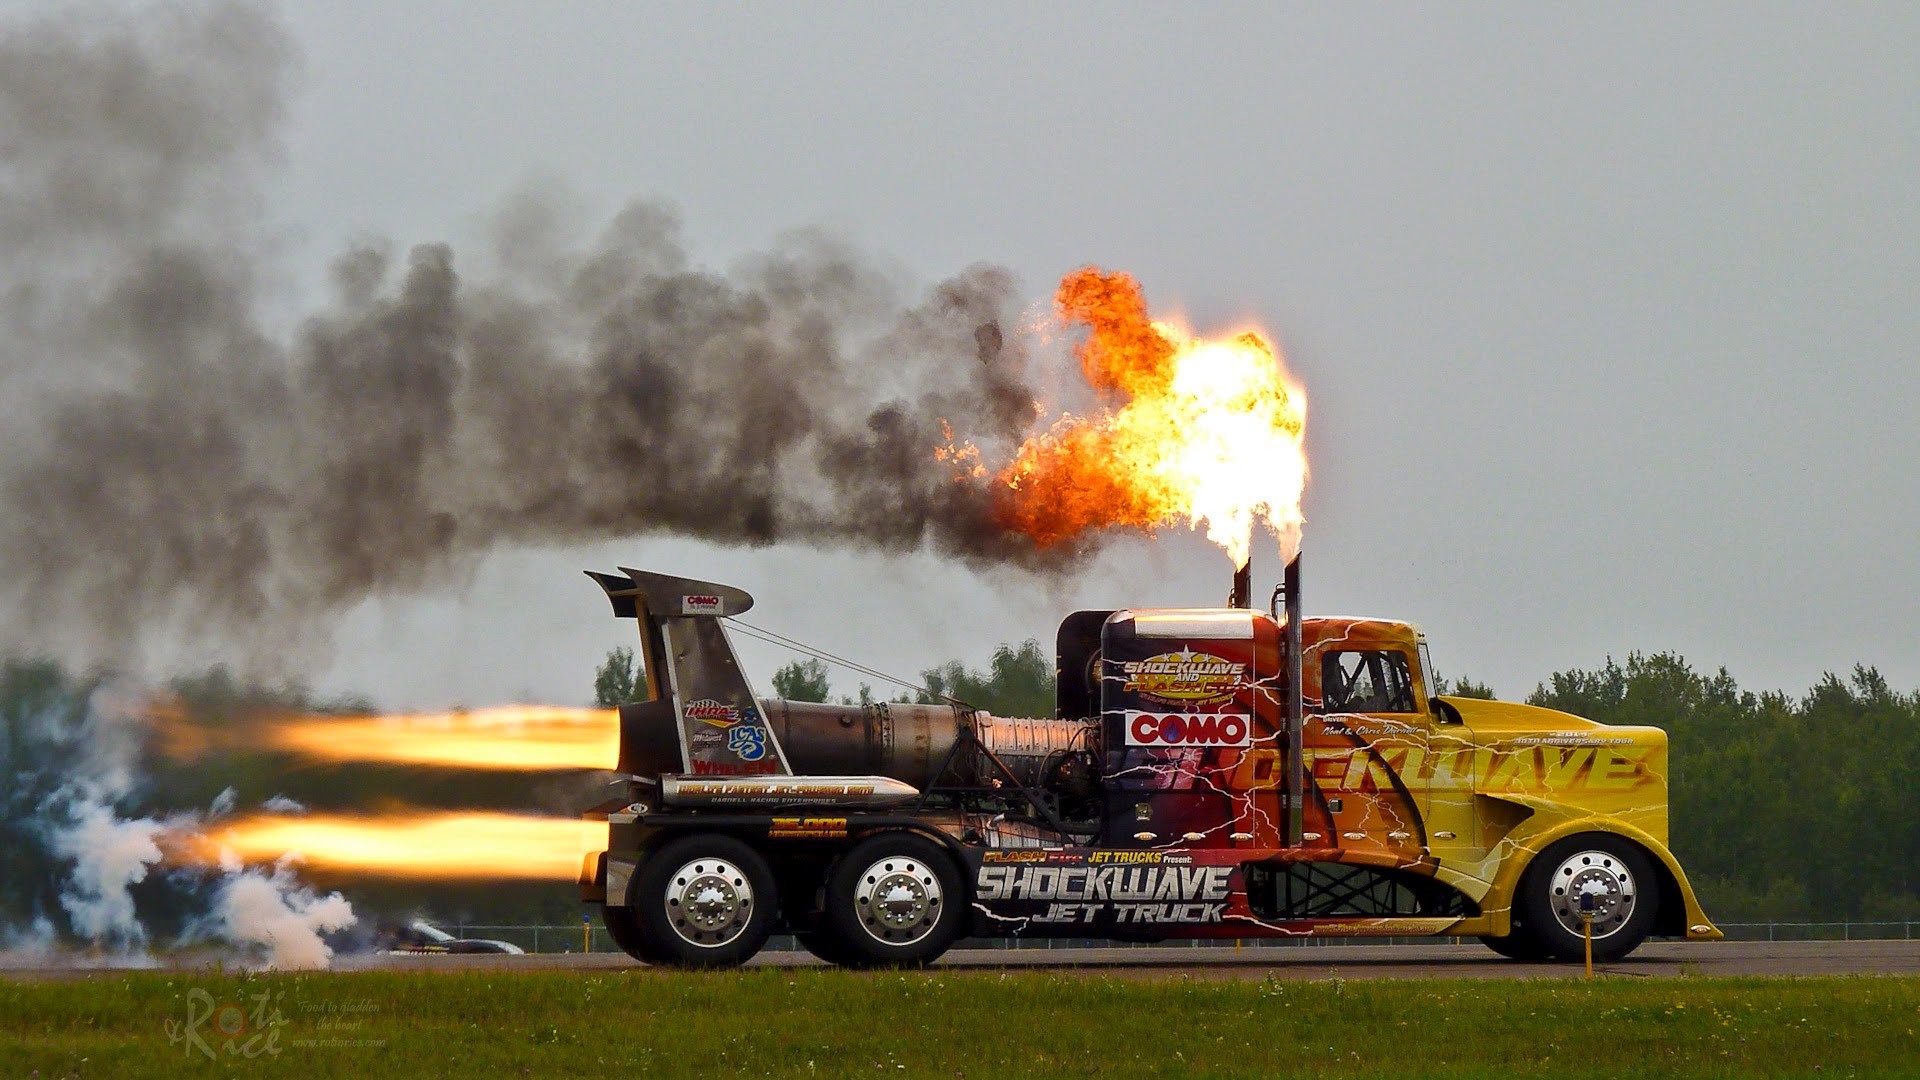 1920x1080 Shockwave is World's Fastest Truck, Powered by Three Jet Engines That  Generate 36,000HP